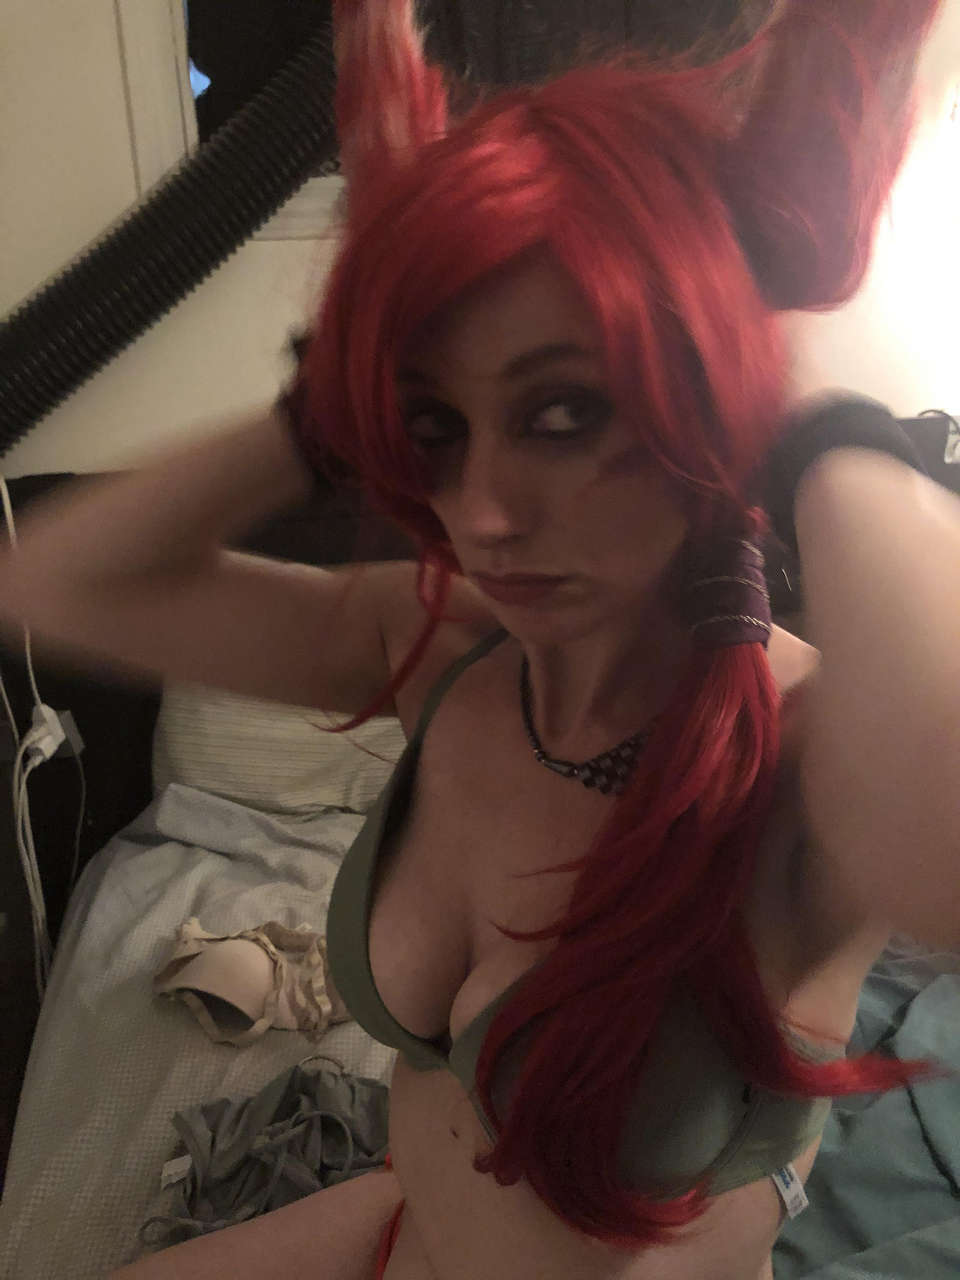 Xayah Cosplay Makeup Test Almost Ther